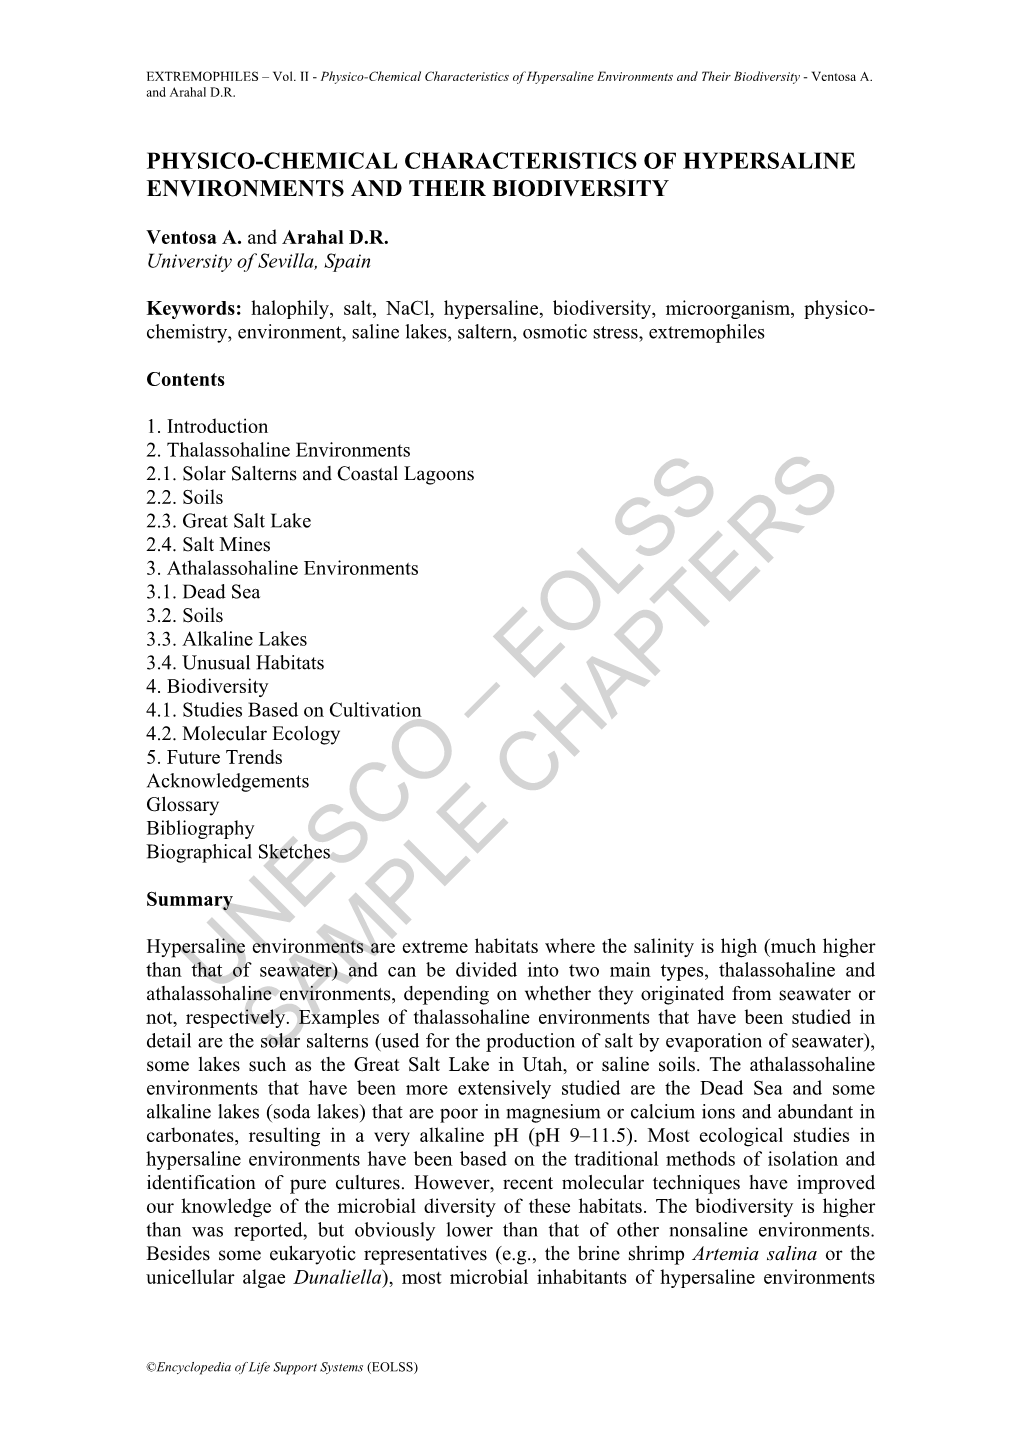 Physico-Chemical Characteristics of Hypersaline Environments and Their Biodiversity - Ventosa A